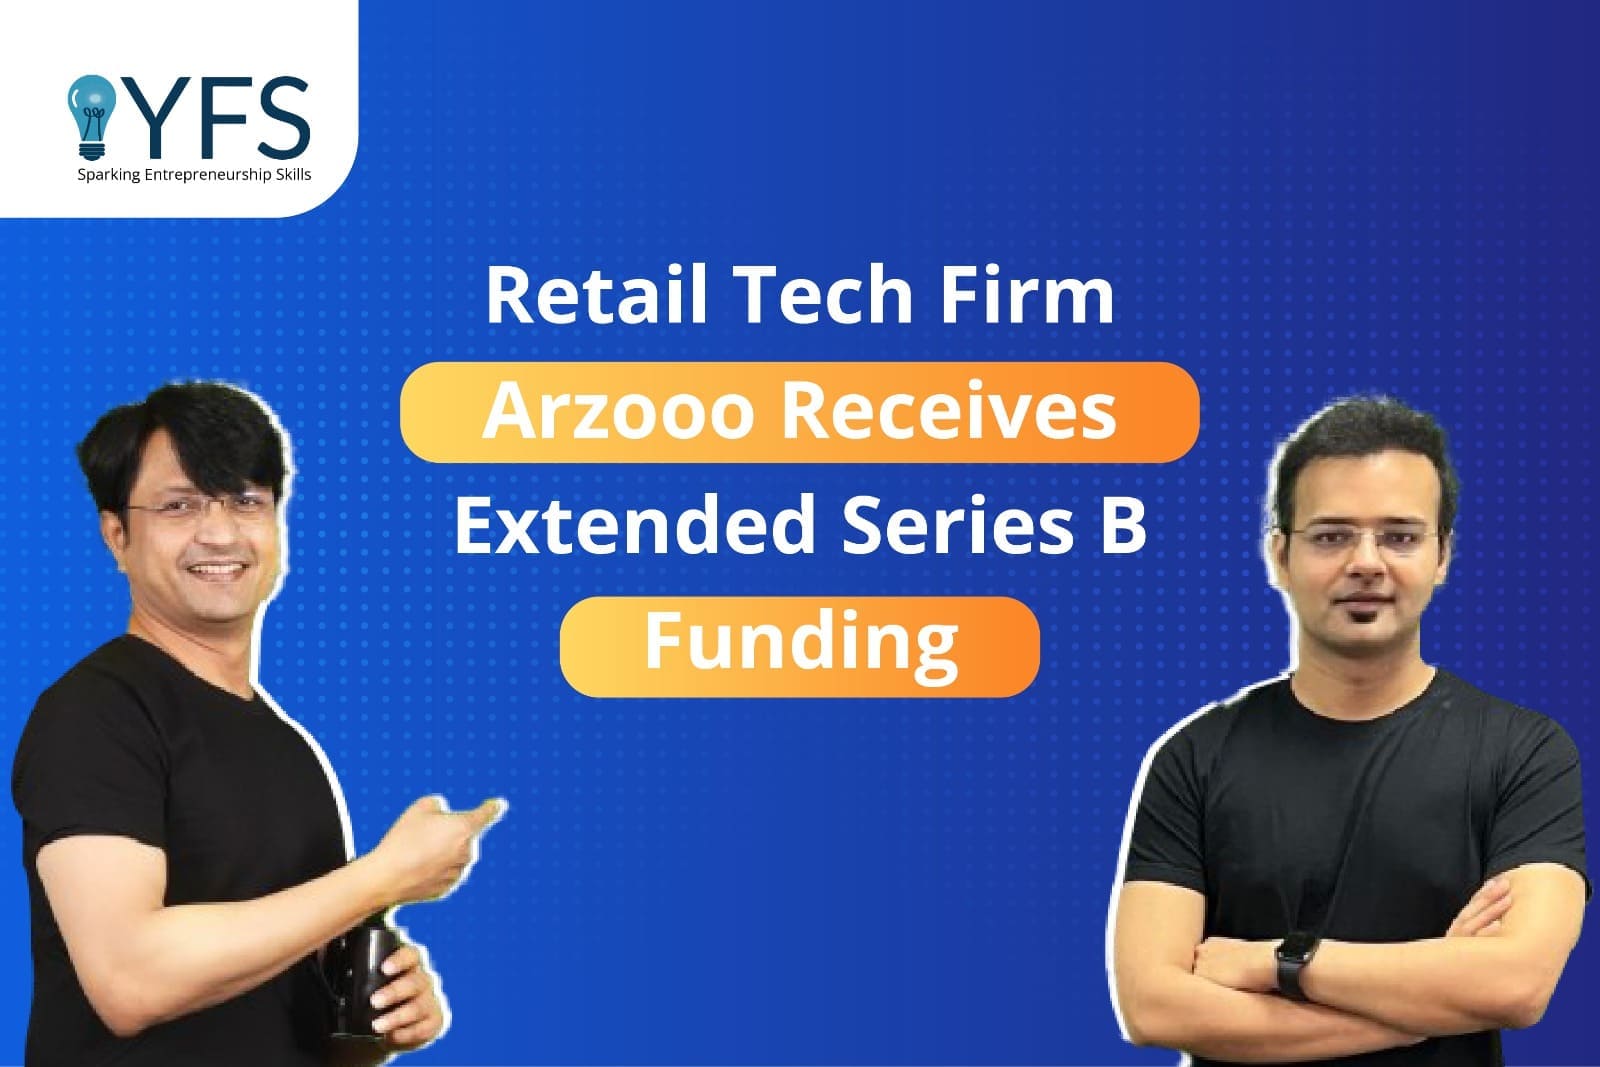 Retail Tech Firm Arzooo Receives Extended Series B Funding